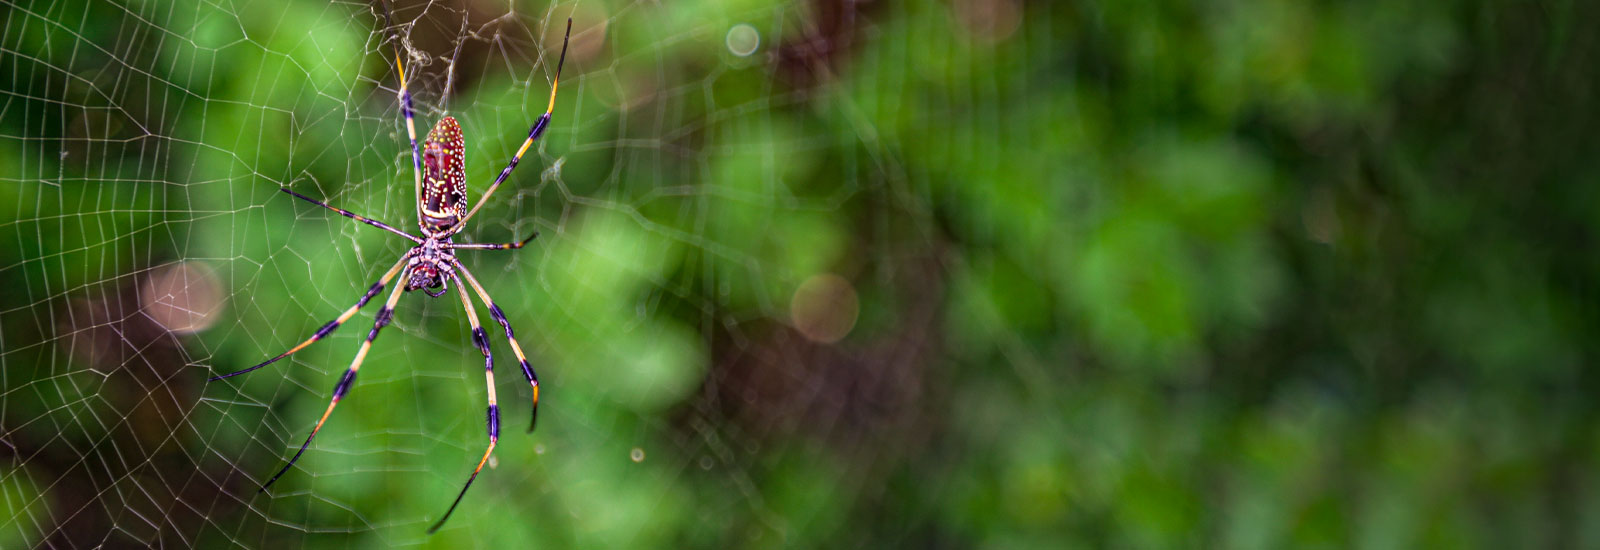 A spider photographed at Biscayne National Park. Photo: Quanxi He/University of Miami